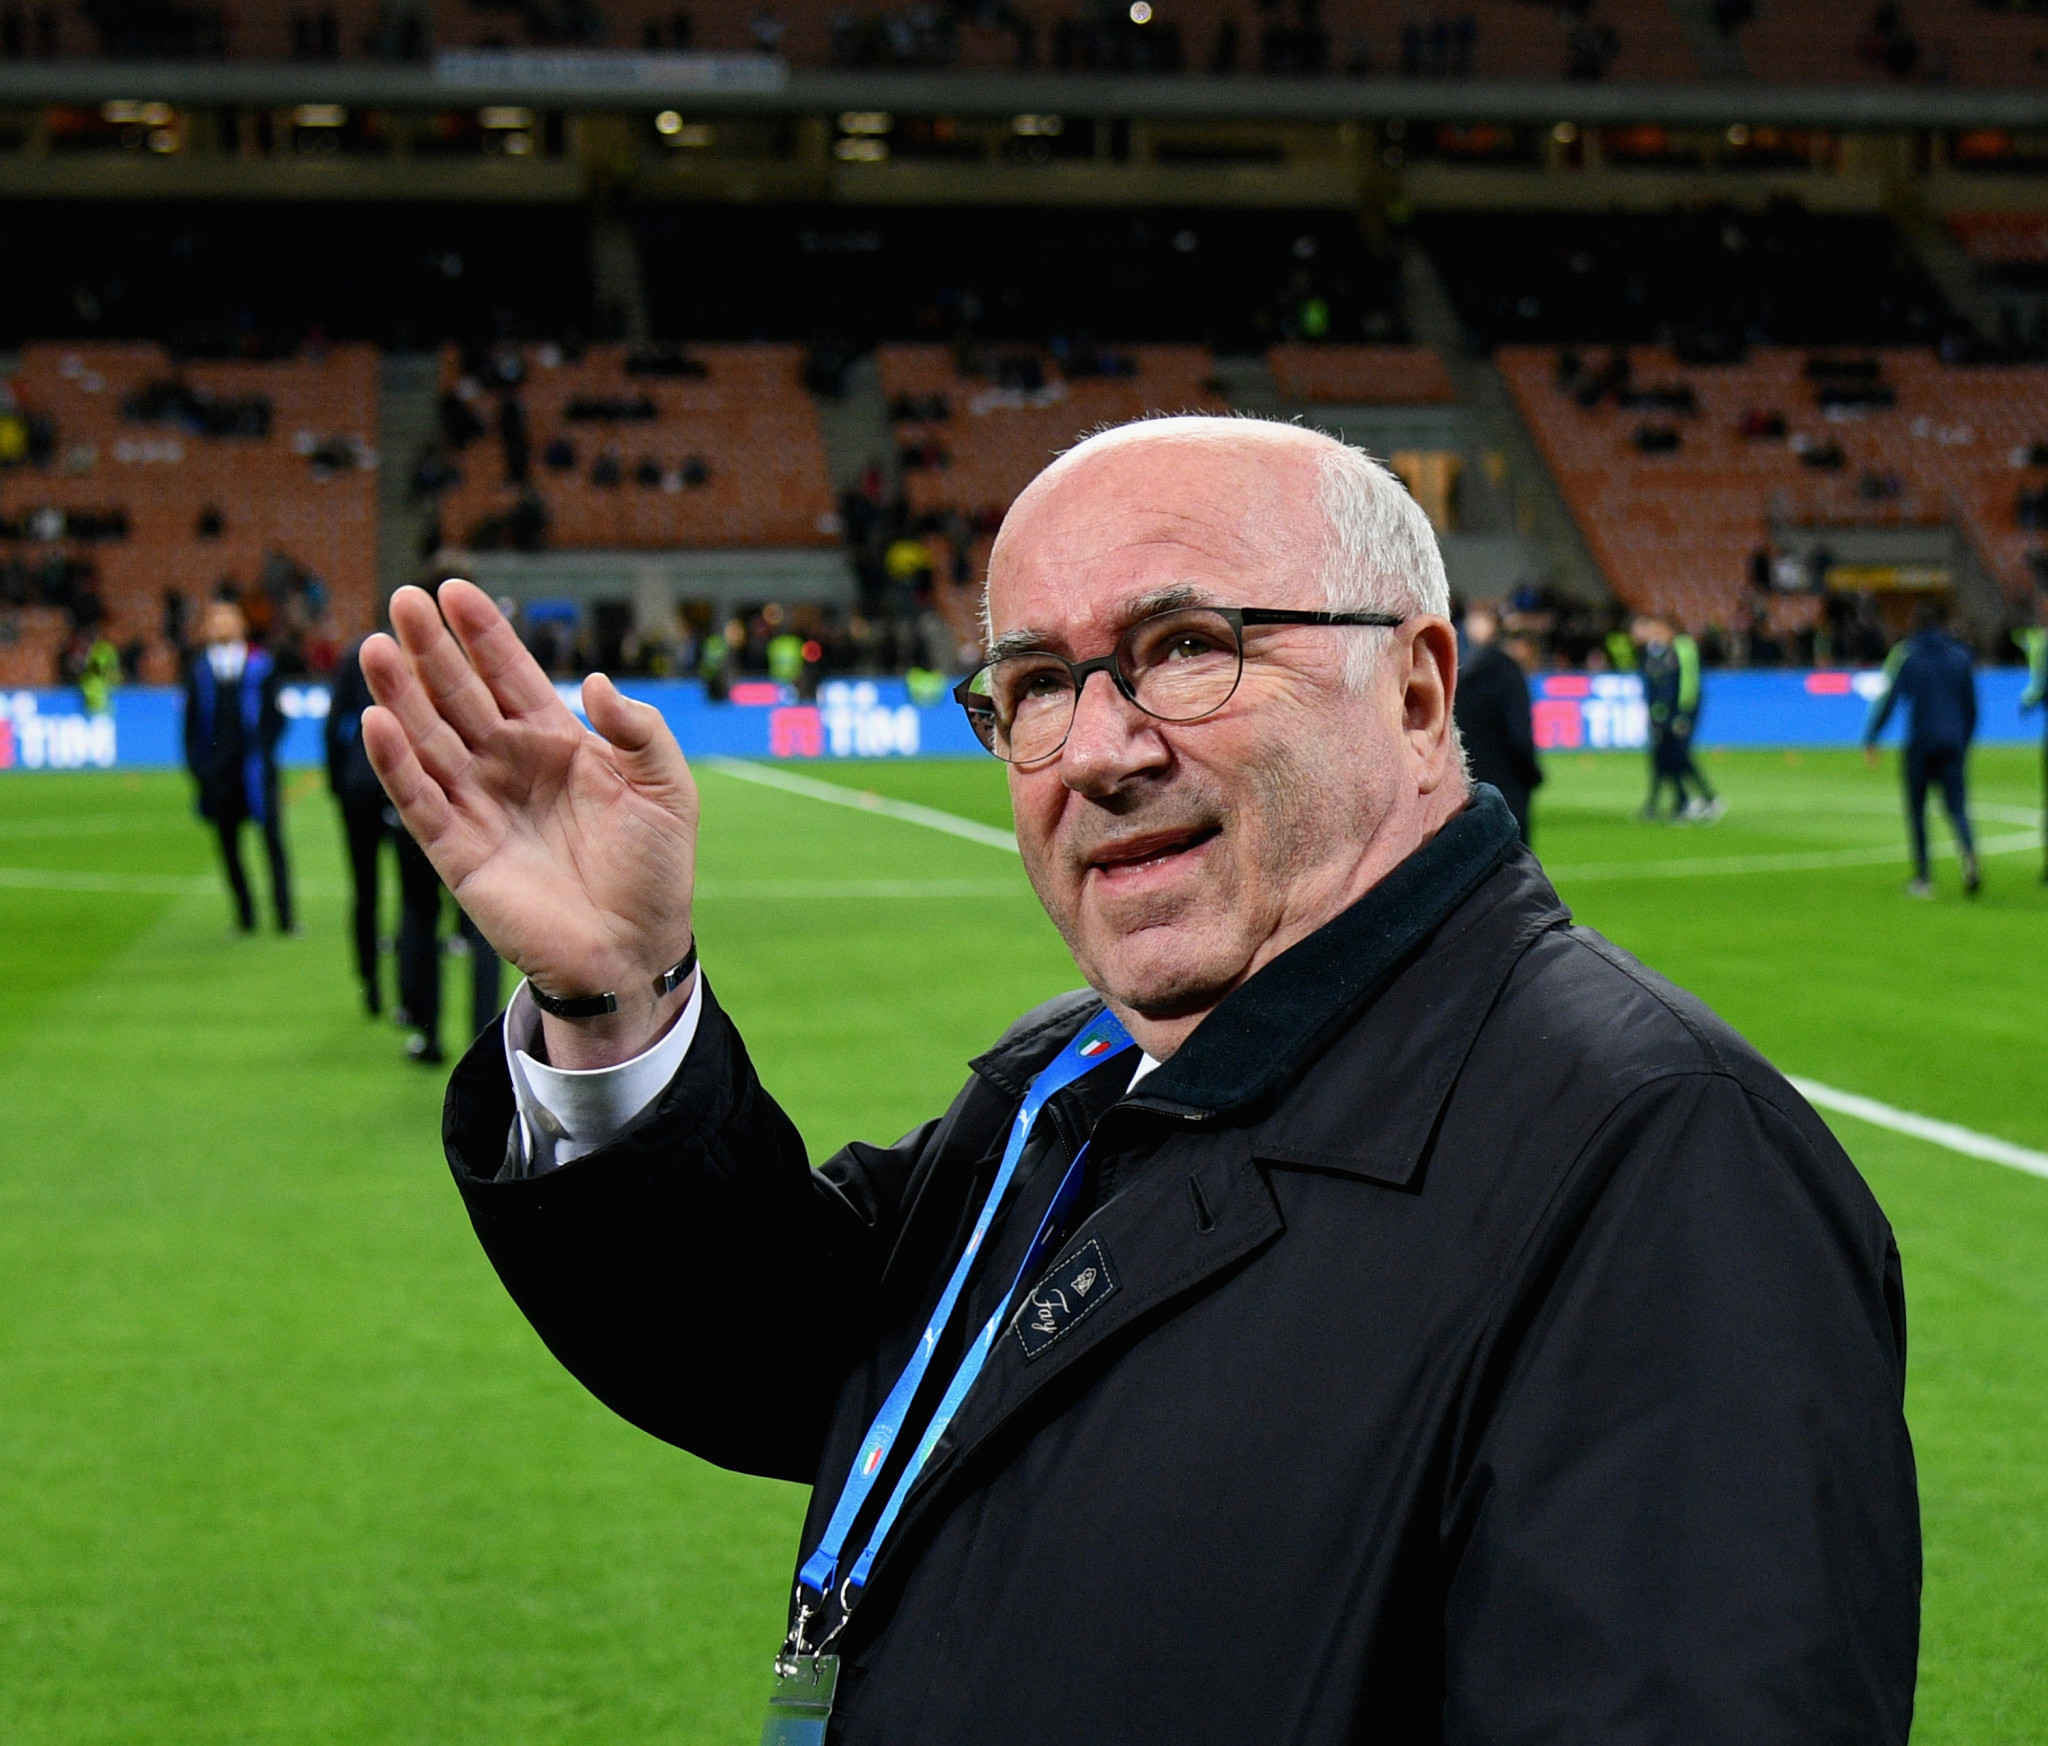 Malagò calls for resignation of Italian Football Federation head after failure to qualify for World Cup